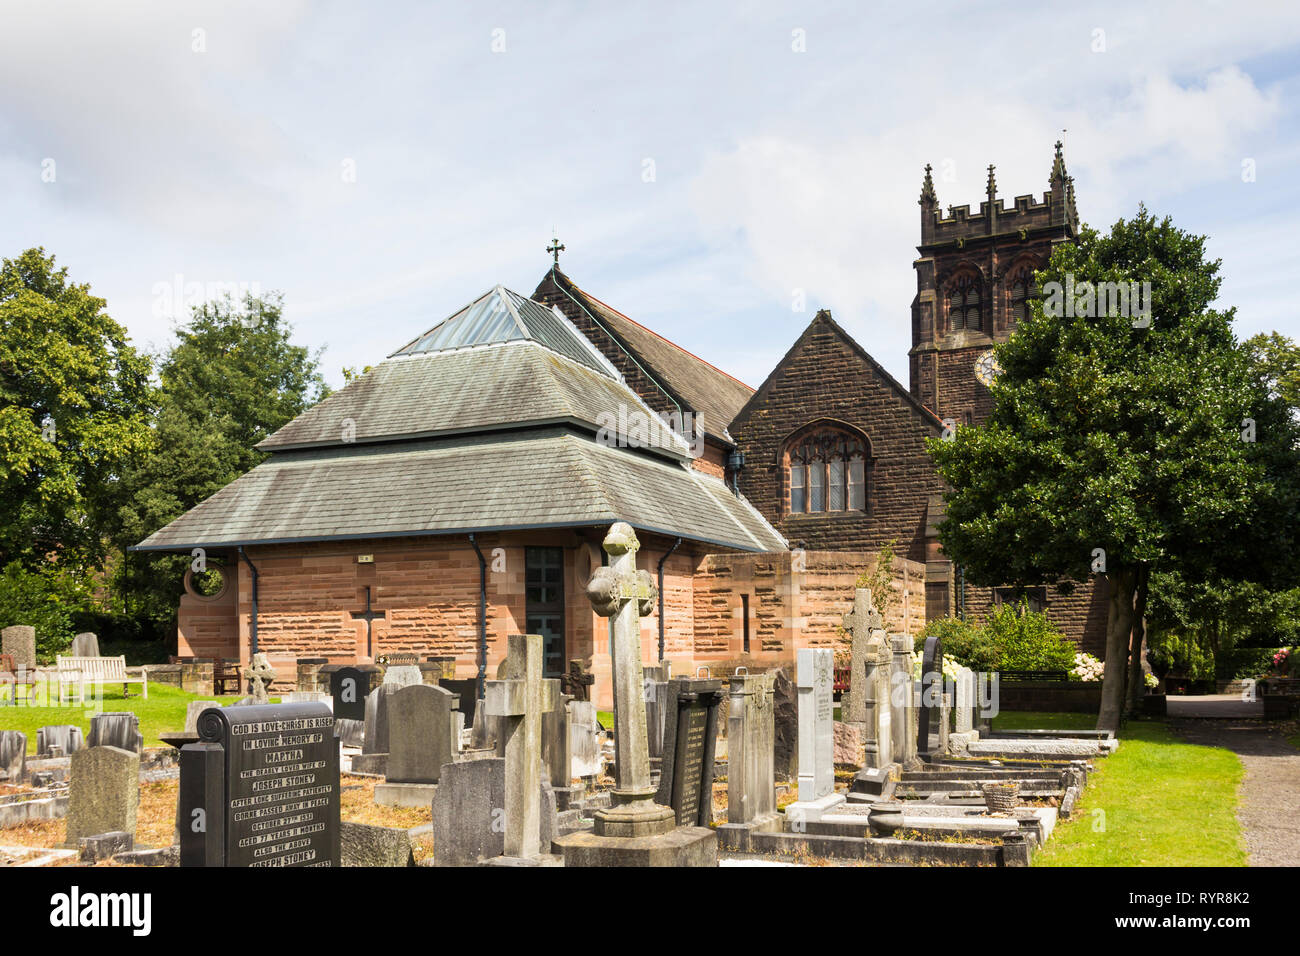 Gravestones in the graveyard of  St Peters church, Woolton, Liverpool.  It was at this church where Paul McCartney and John Lennon first met at a Chri Stock Photo